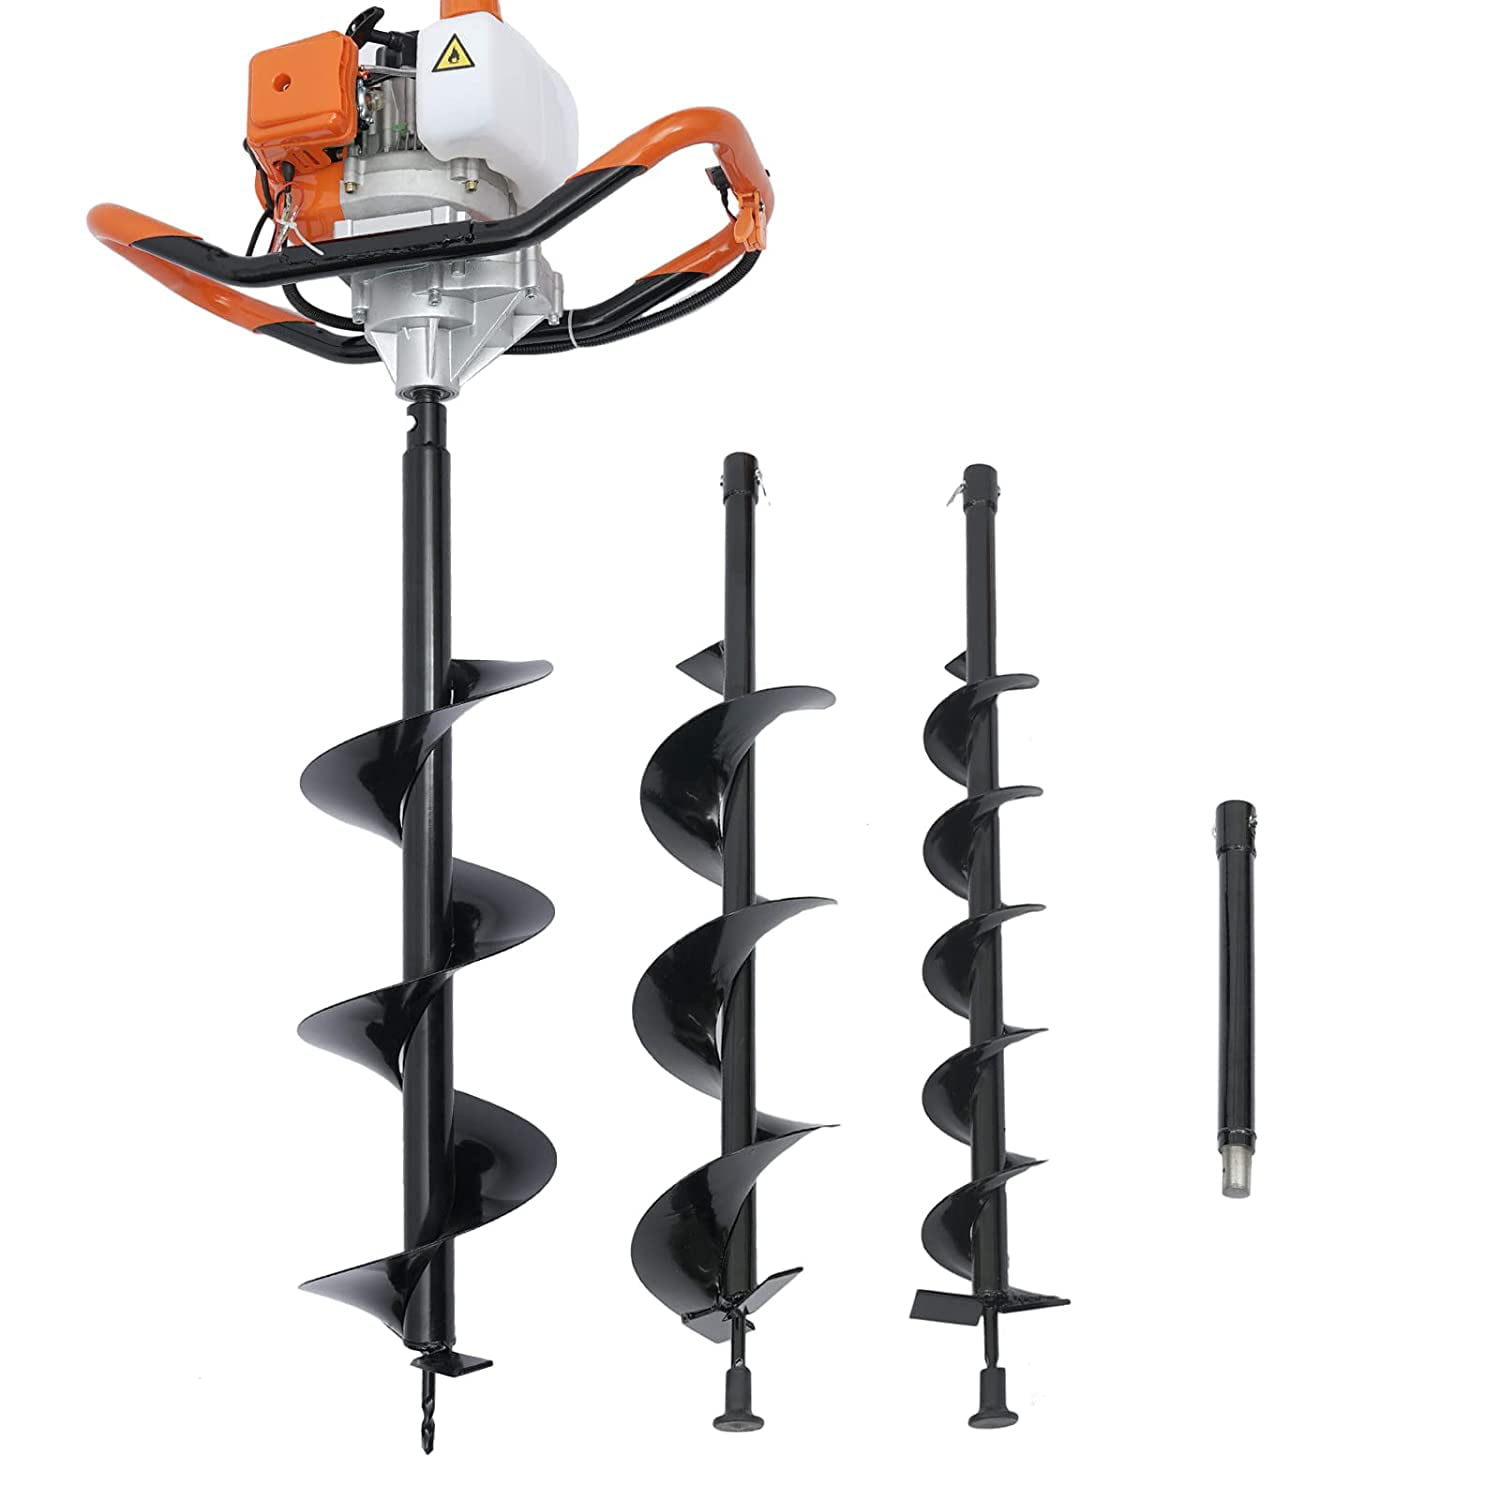 for Fence and Planting 52CC 2 Stroke Gas Powered Posthole Digger Earth Auger Borer Fence Ground with 2 Drill Bits 4and 8 Extension Bar 12 